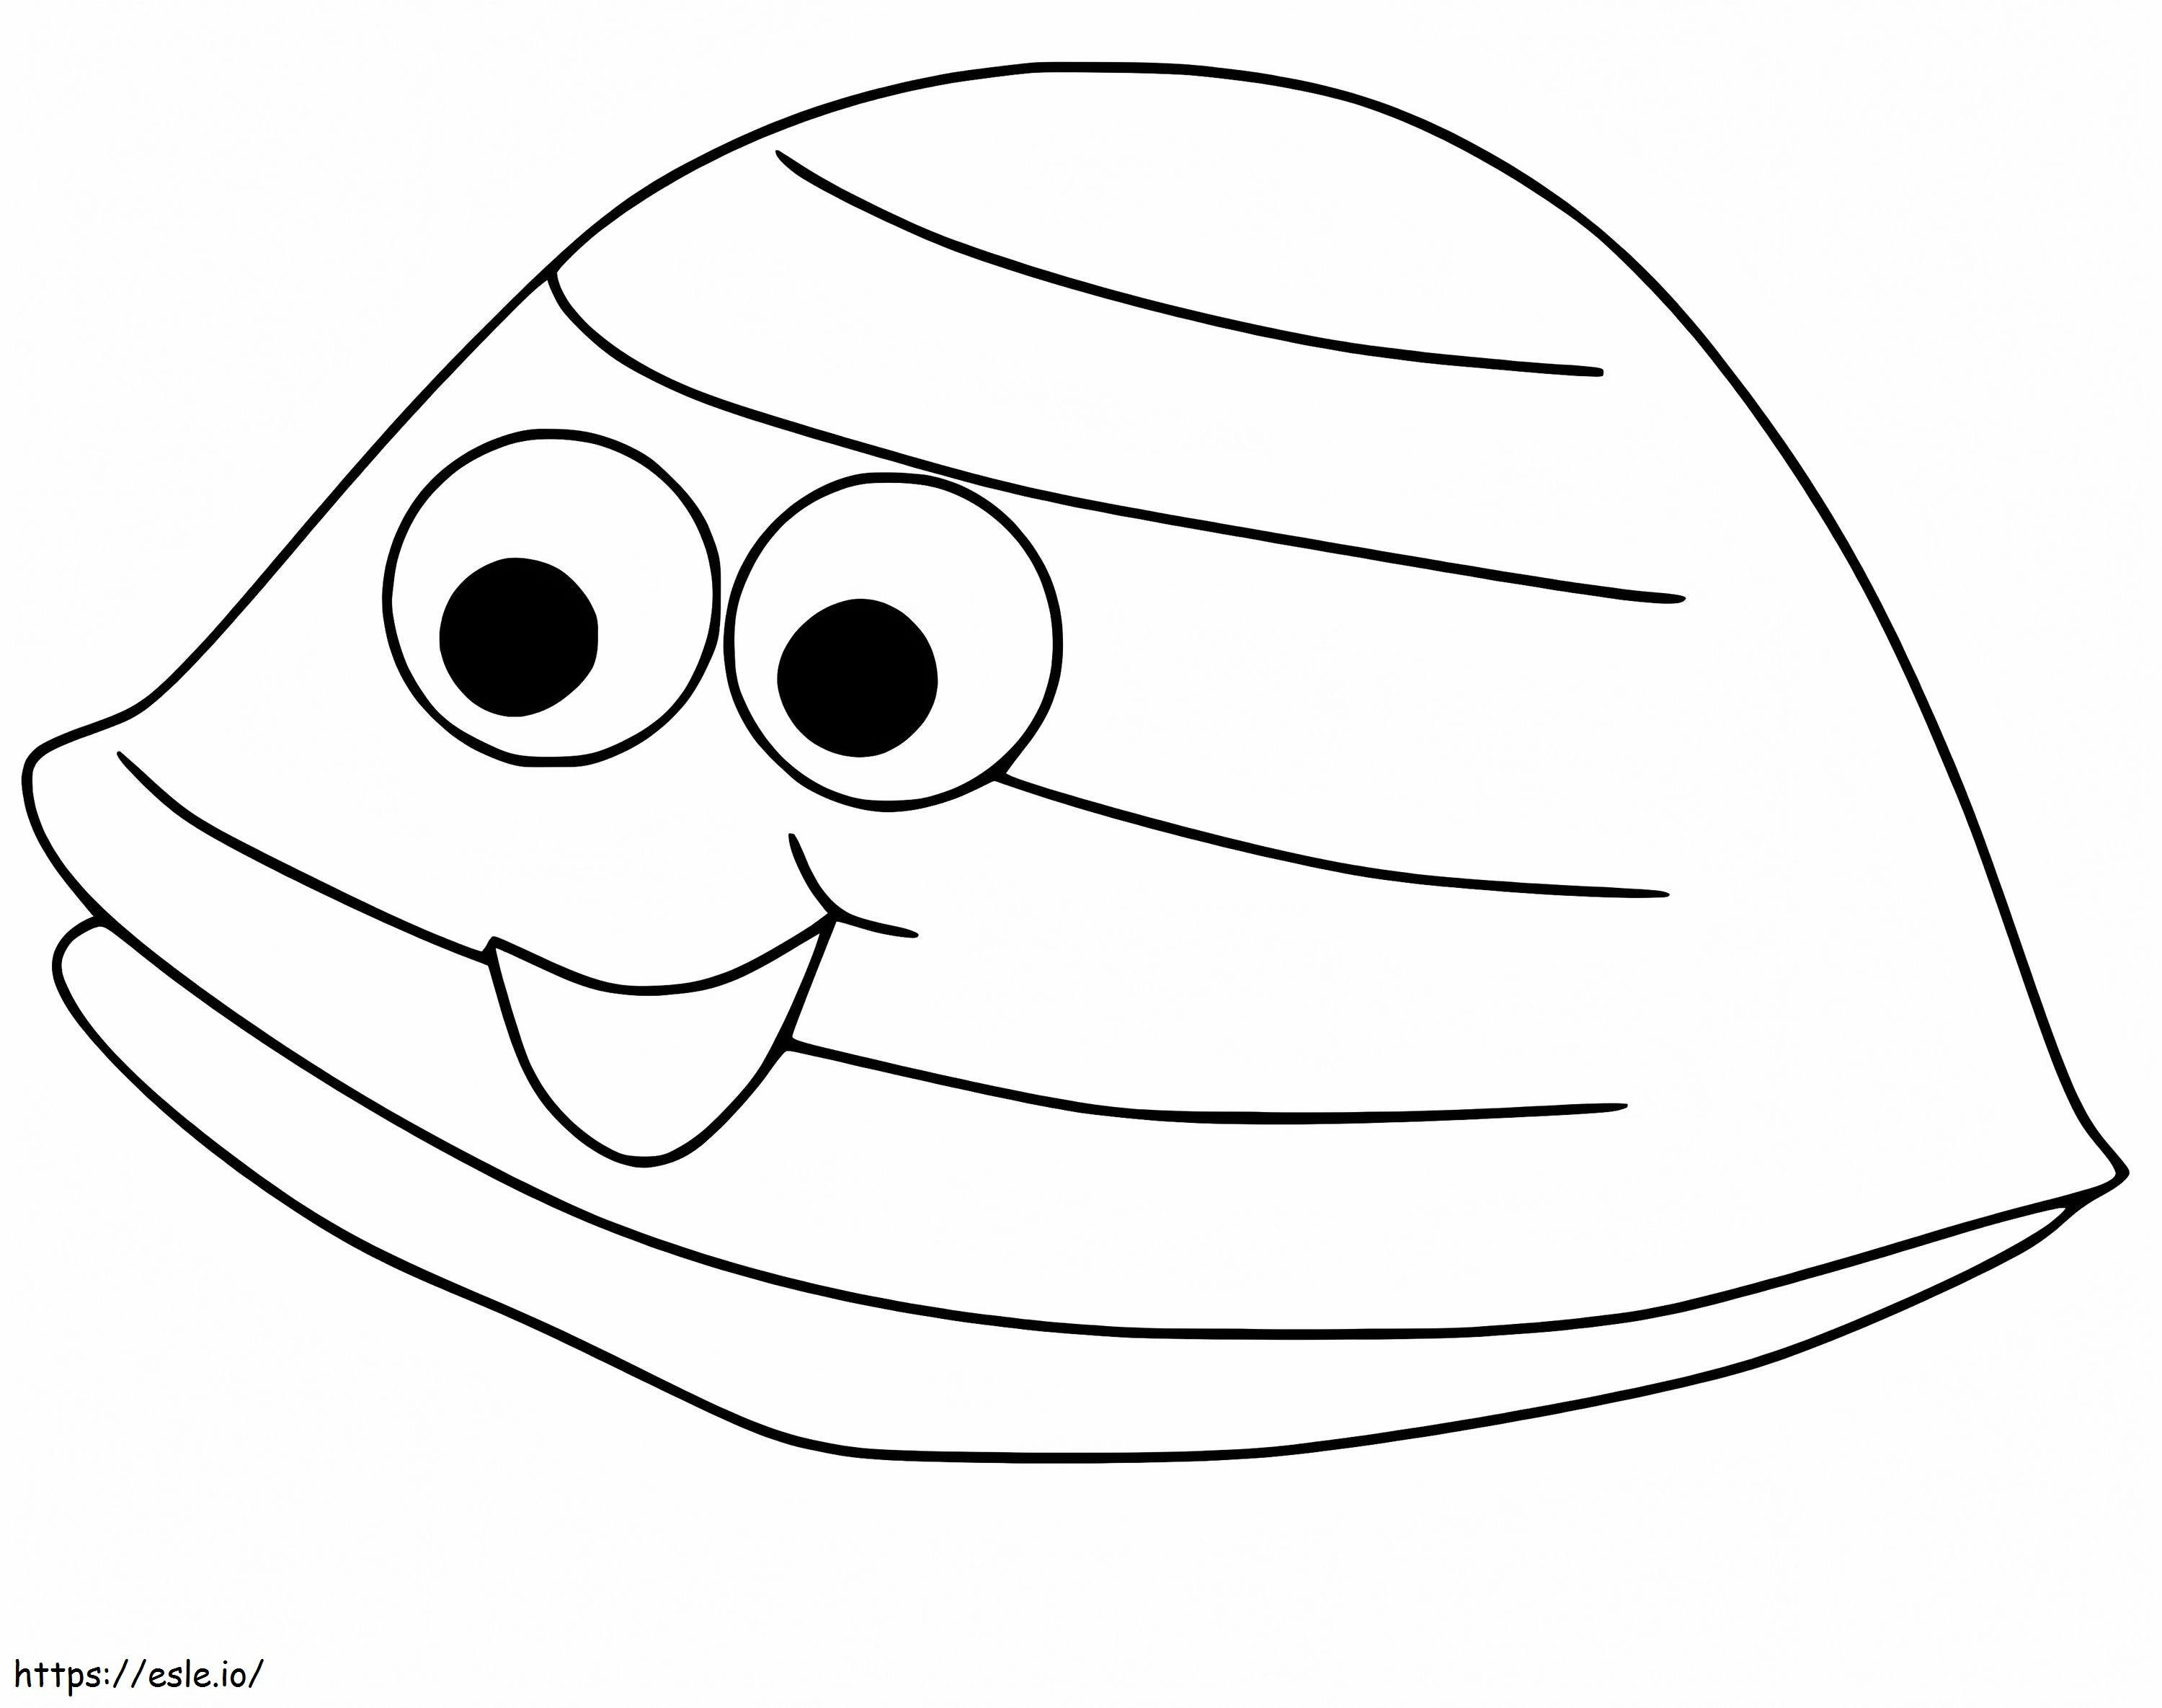 Happy Clam coloring page